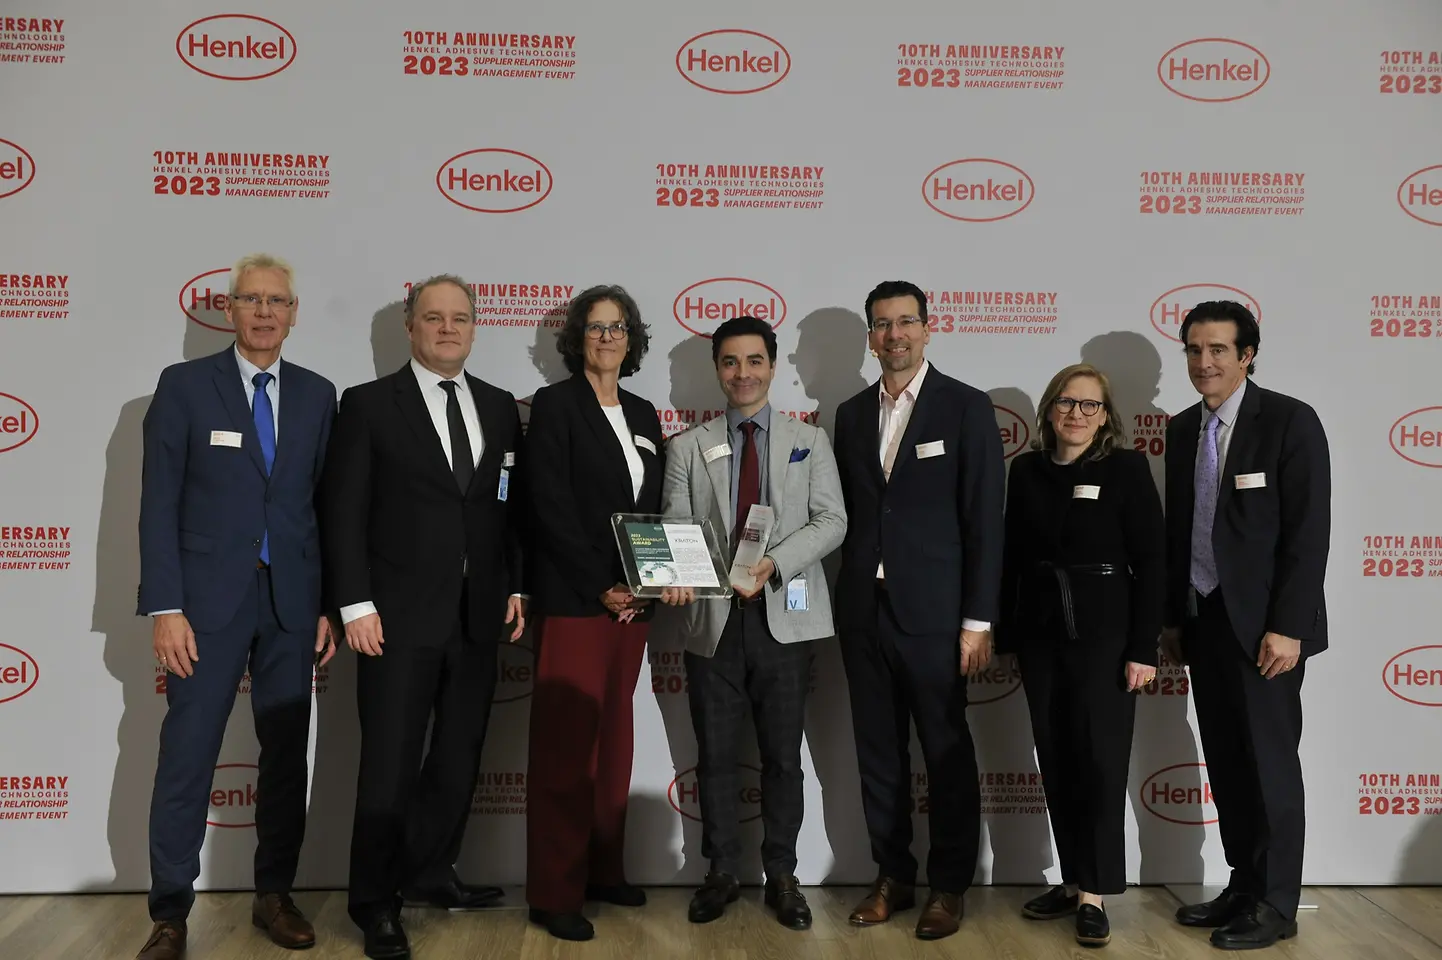 
Sustainability Award 2023 for Kraton (from left to right): Ernst Stoelzel – Vice President Sales & Marketing for Performance Products at Kraton Polymers – Minco van Breetvoort, President Kraton Pine Chemicals, Marianne Ros – Vice President Research & Development, Kraton Pine Chemicals, Pedro Lopes – Chief Sustainability Officer at Kraton, Mark Dorn – Executive Vice President Henkel Adhesive Technologies, Pernille Olsen – Corporate Senior Vice President Packaging & Consumer Goods at Henkel Adhesive Technologies, Kevin Campbell – Vice President of Commercial and Procurement, Kraton Pine Chemicals